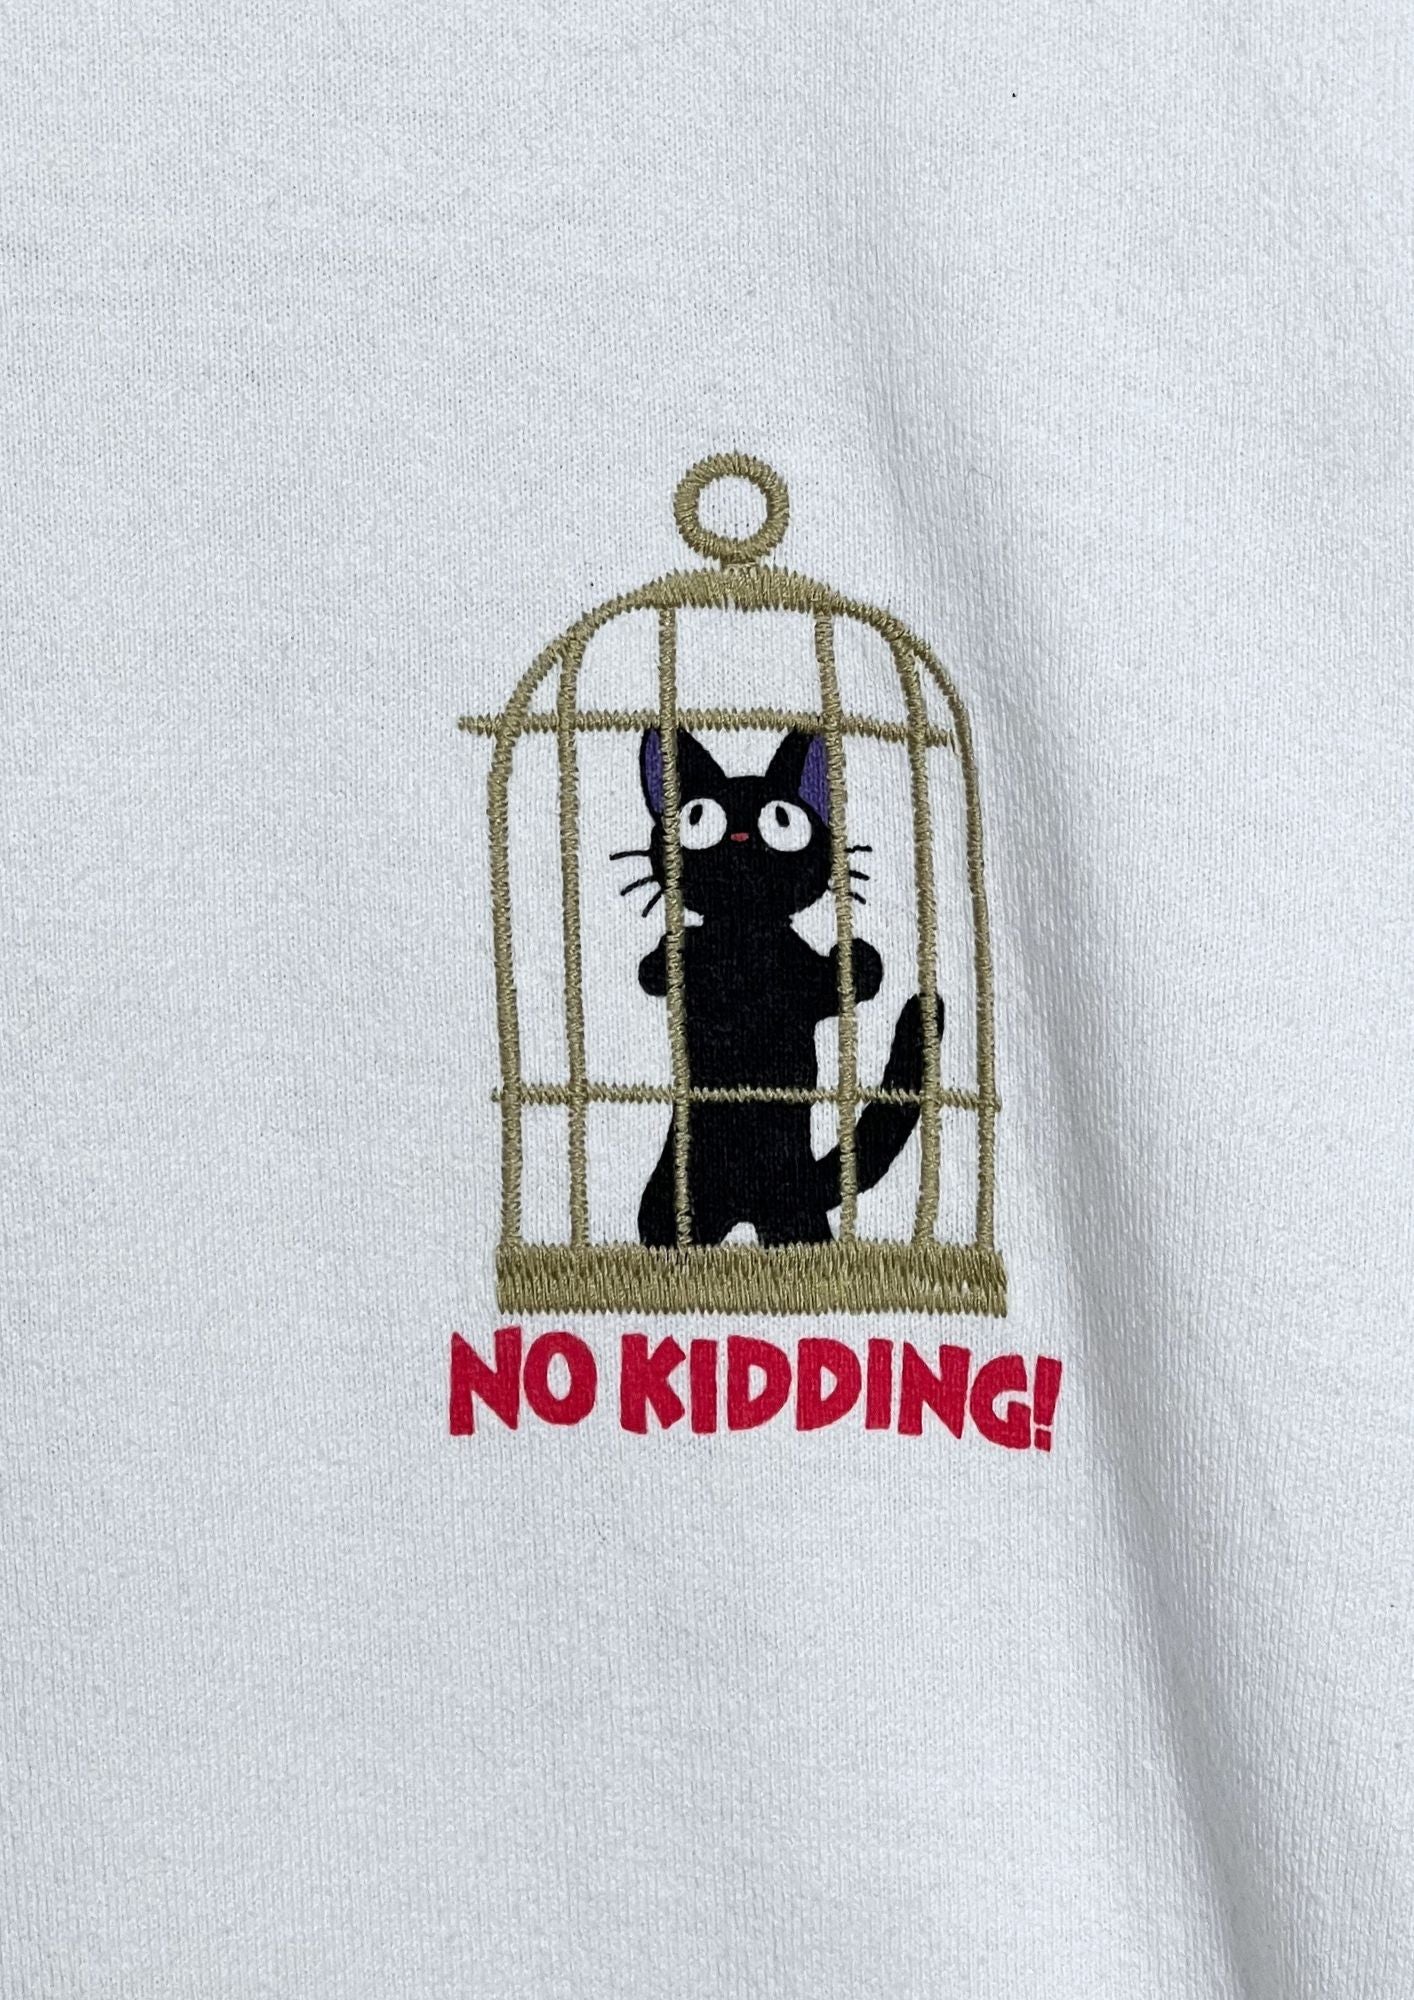 2019 Studio Ghibli Kiki's Delivery Service x GBL You're Late! Embroidered T-shirt